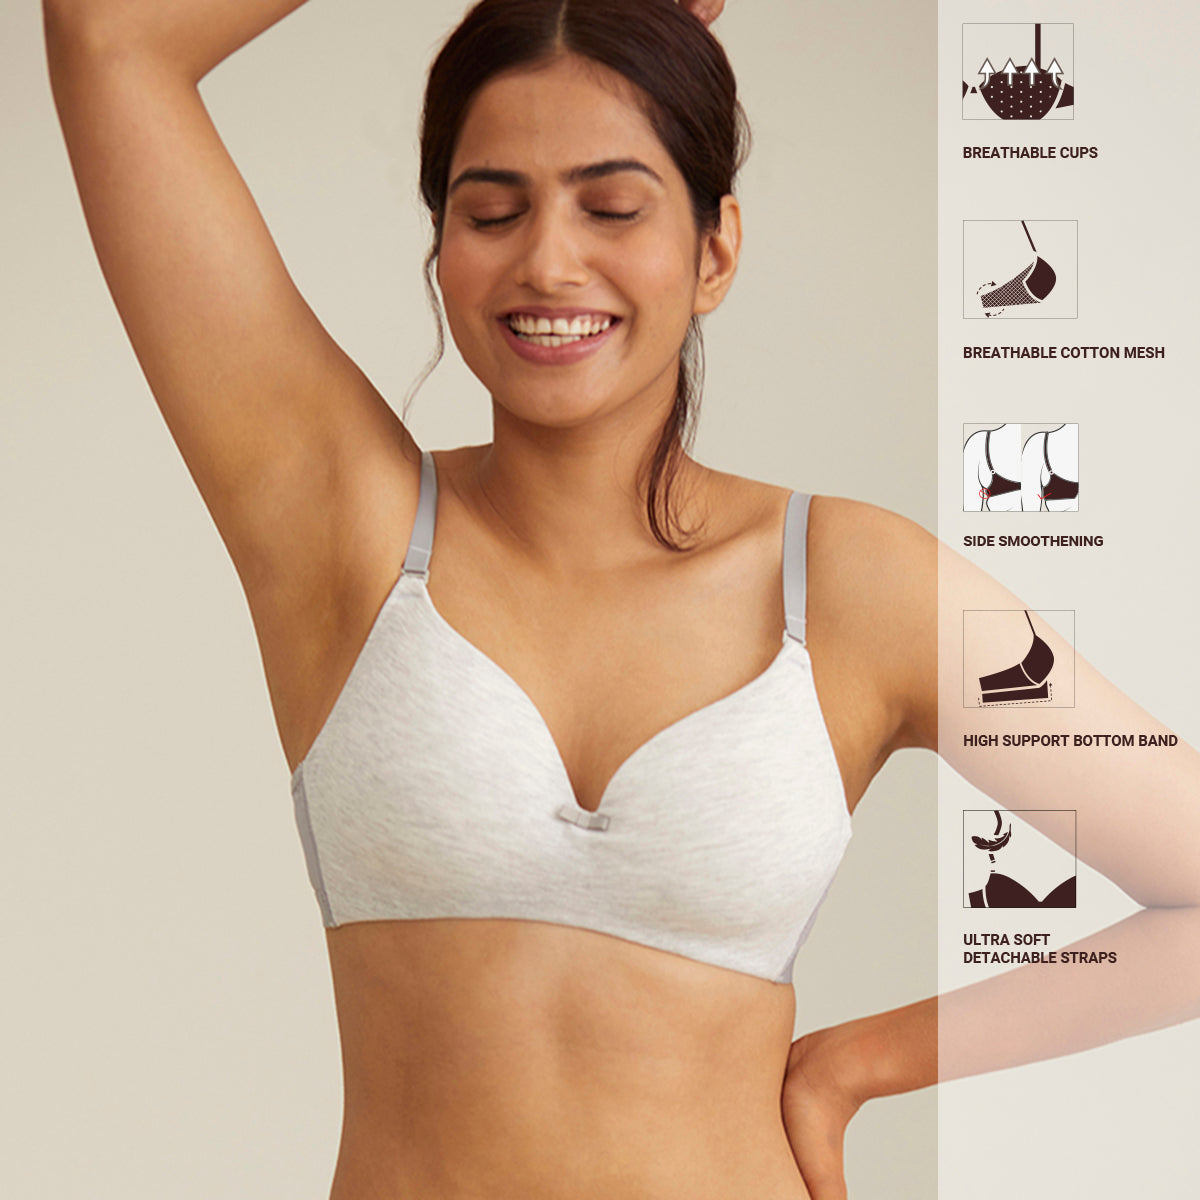 Women T-Shirts Built-in Bra Padded Stretchable Modal Tops Tshirts